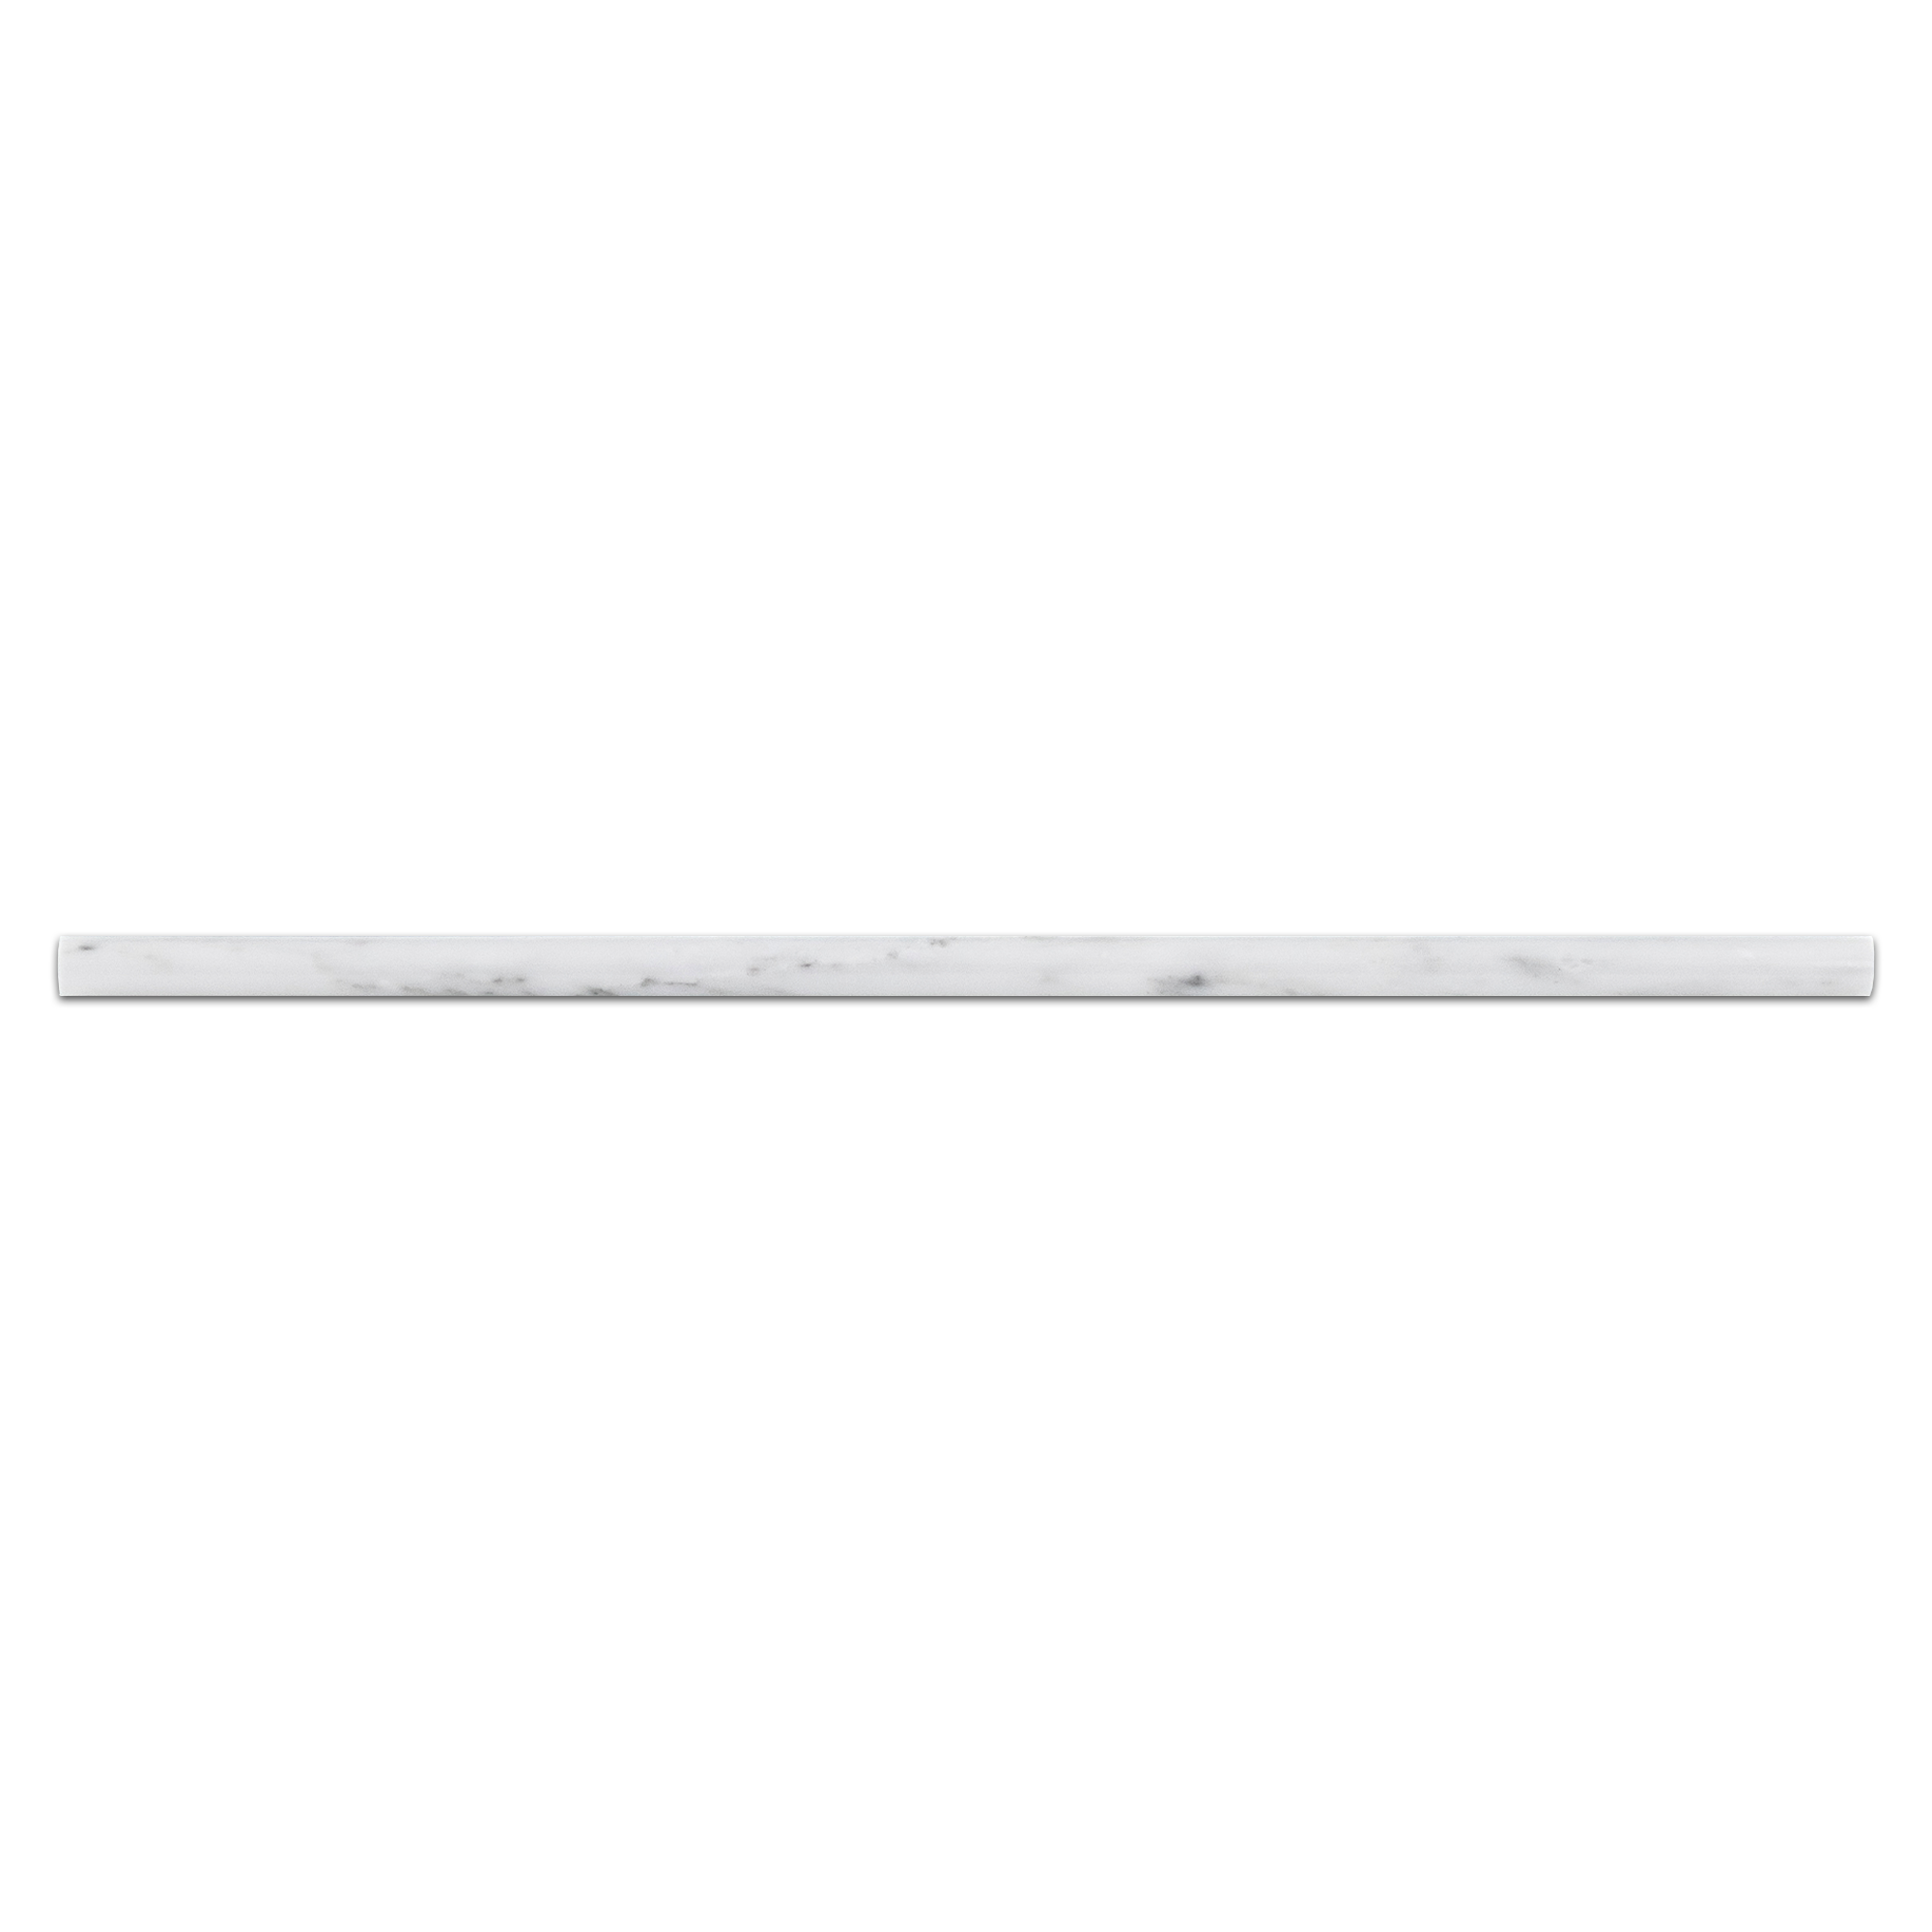 Elon Pearl White Marble Micro Pencil Tile 0.375x12x0.625 Polished - AM8628P Surface Group International